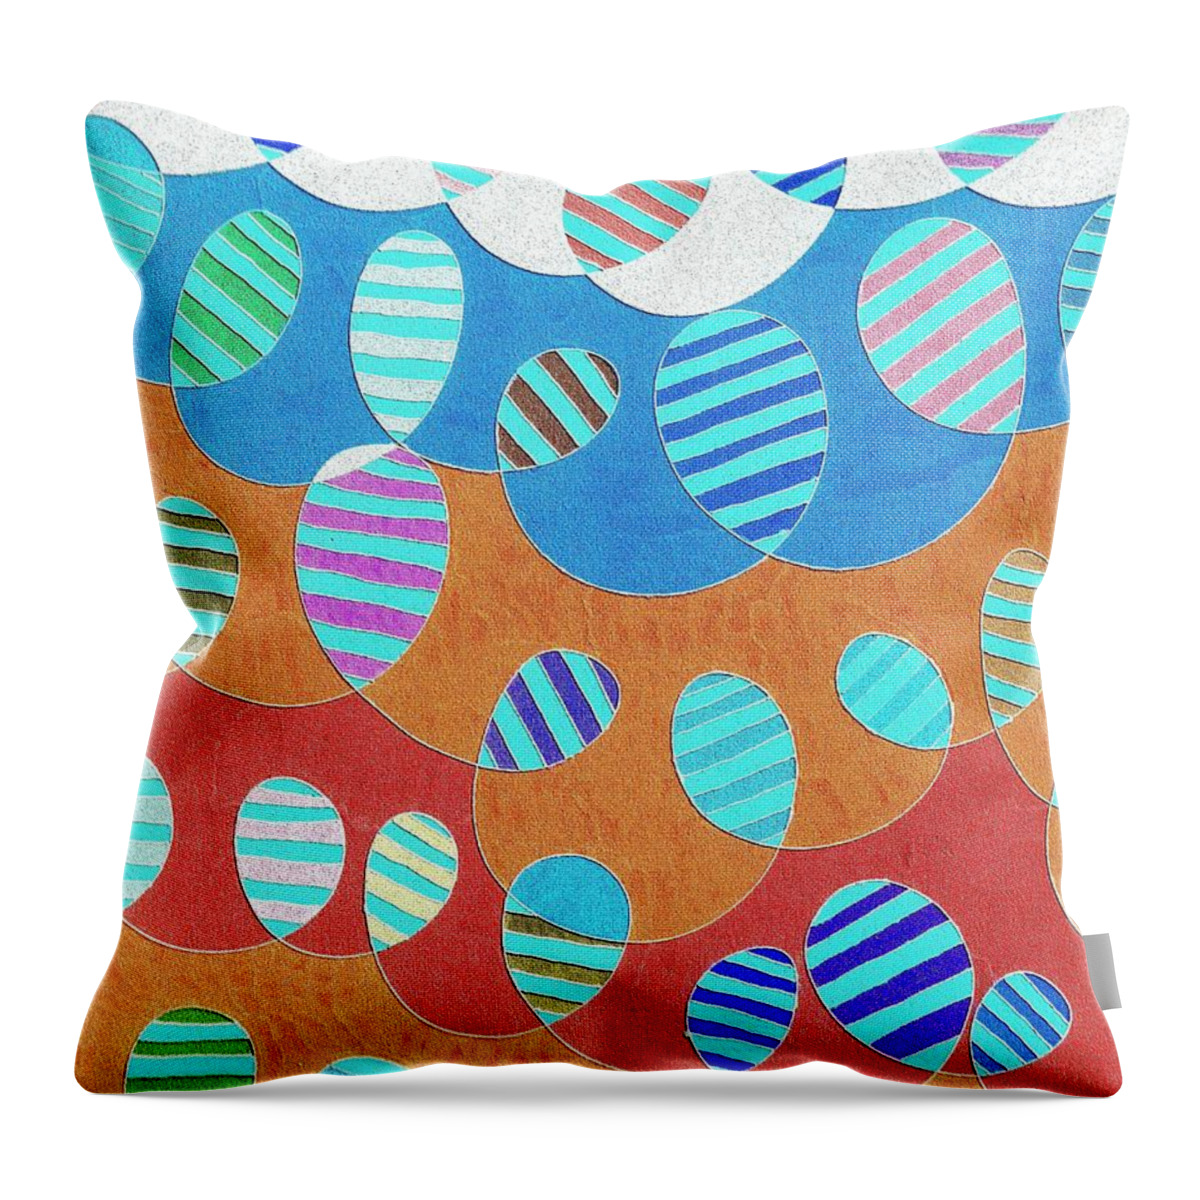 Abstract Throw Pillow featuring the digital art Sunny Balloons by Susan Epps Oliver